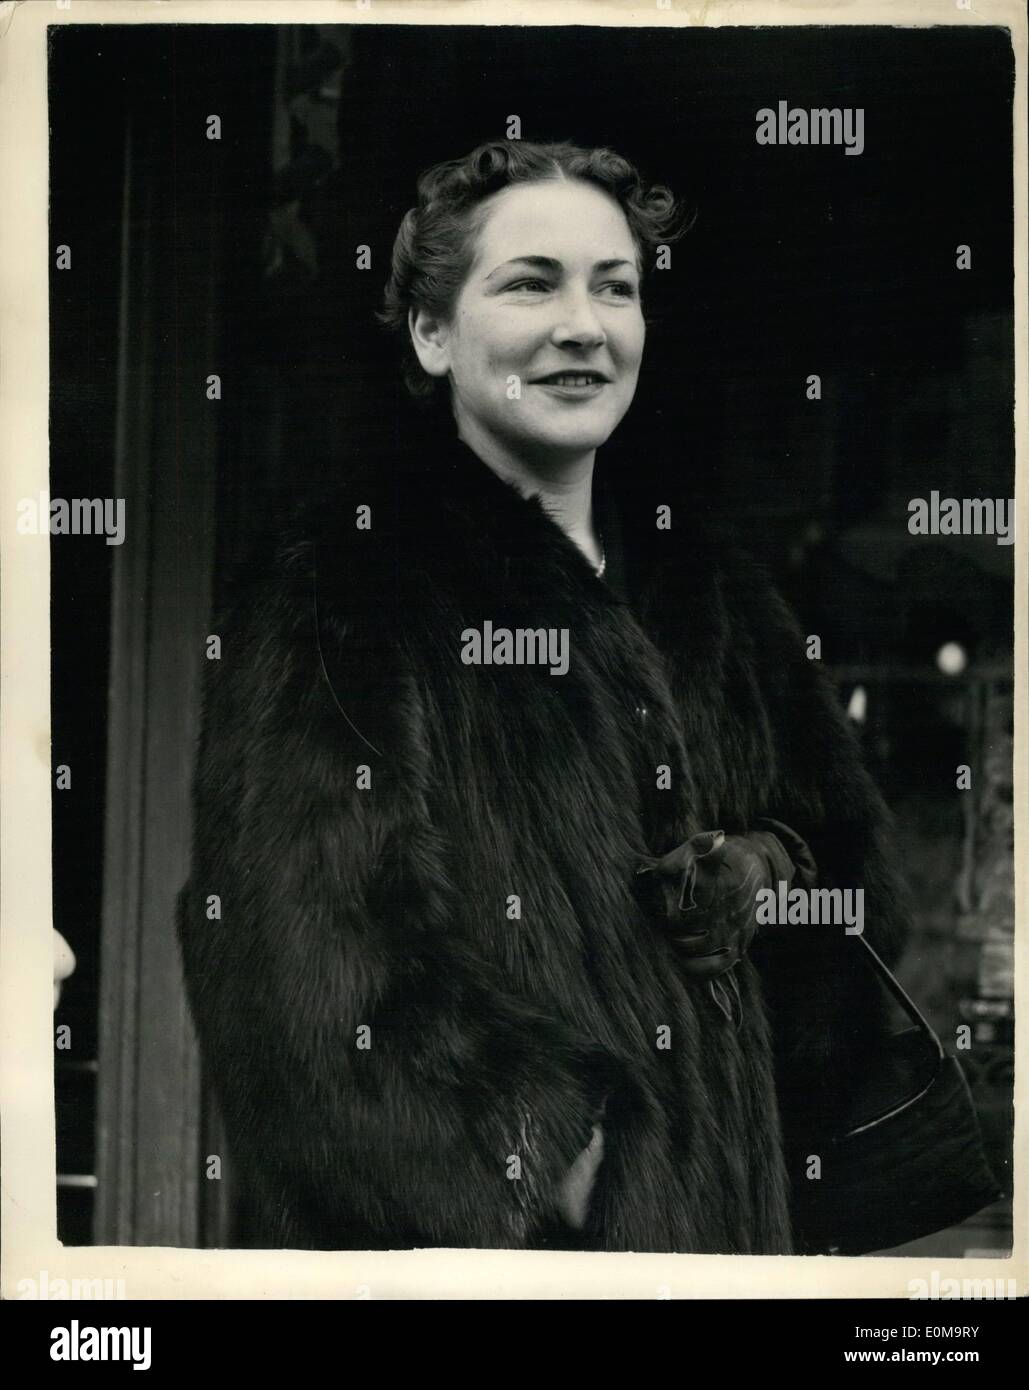 Mar. 03, 1954 - Inquest on ''Lady'' Menzies and Mrs. Chesney Resumed.Air Hostess.. The inquest was resumed at Ealing Town Hall on ''Lady'' Menzies and her daughter Mrs. Isobel Chesney whose murdered bodies were found at their Old People's Home, in Ealing.. Keystone Photo Shows:- Janette Van De Berg, an air hostess of K.L.M. seen outside the court - during the inquest. Stock Photo